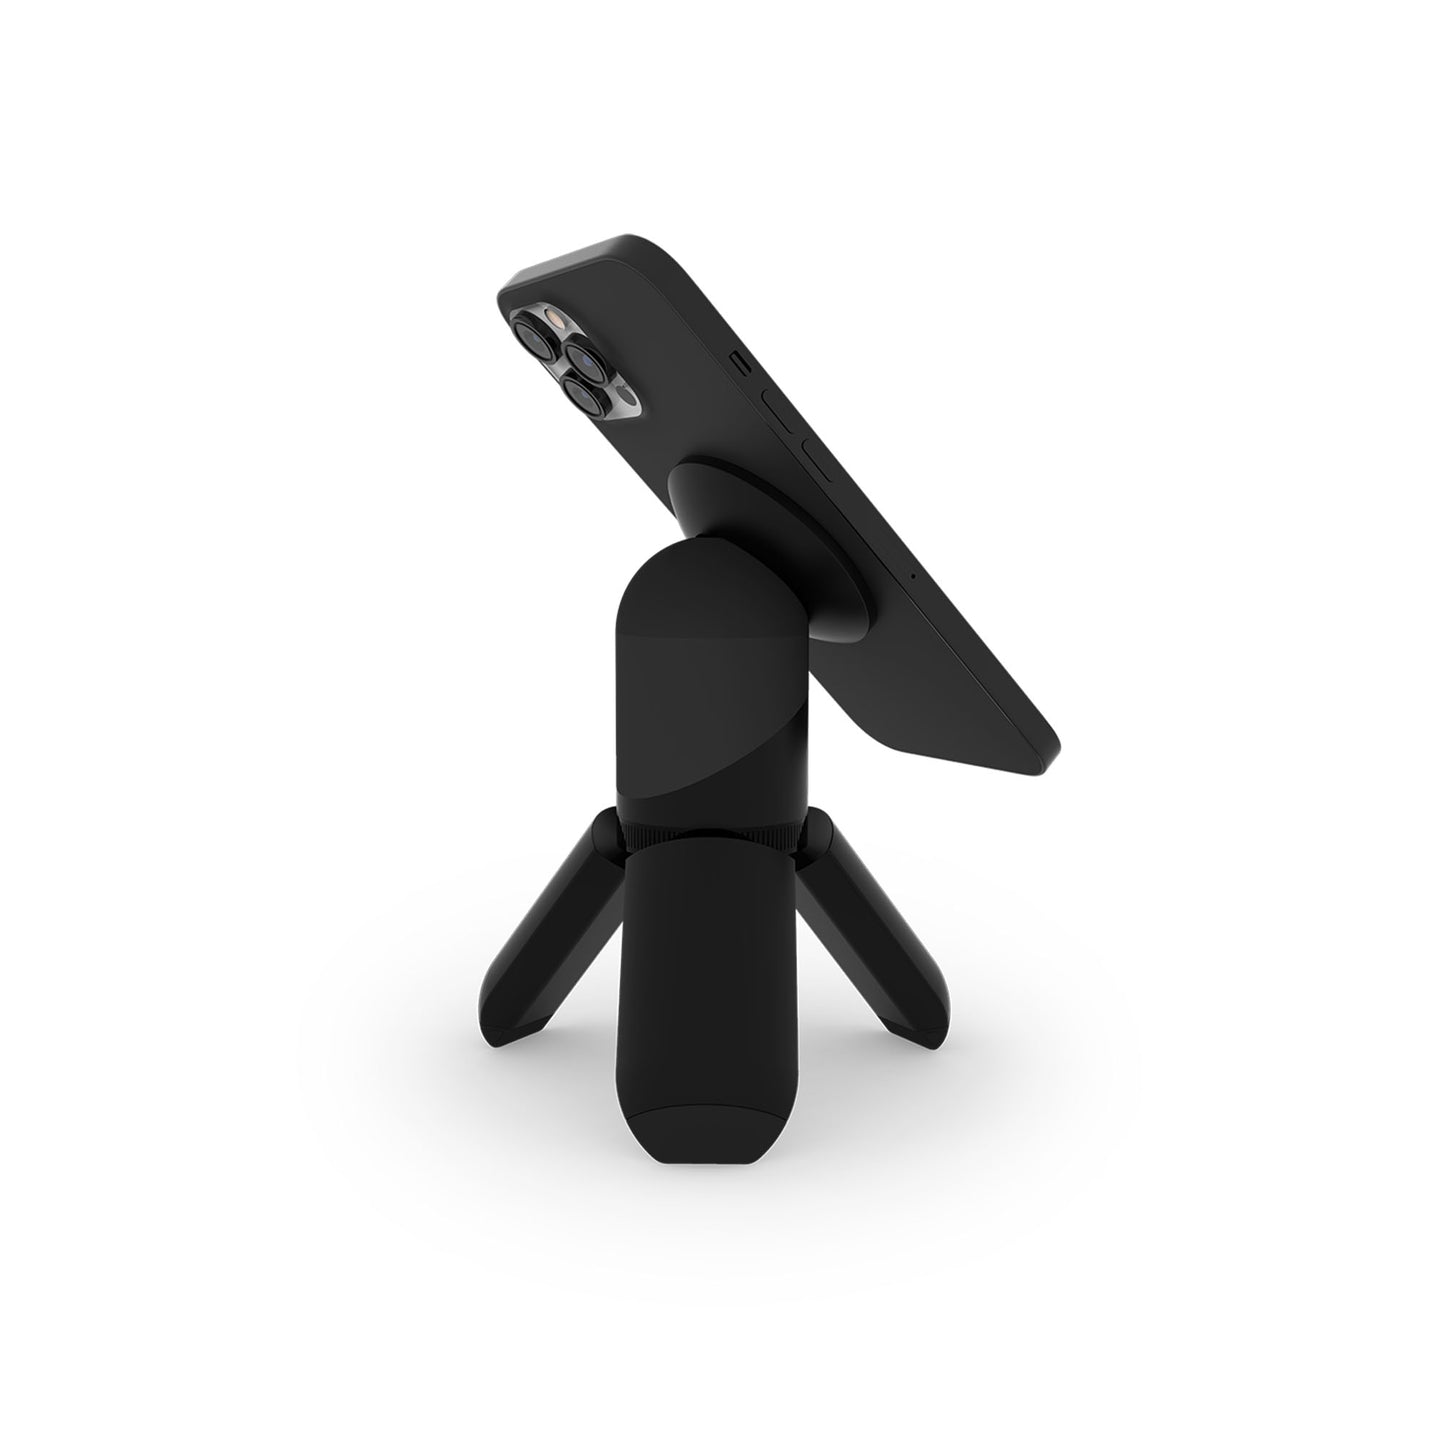 STM MagPod Tripod for iPhone with MagSafe Compability - Black (Barcode: 810046111246 )